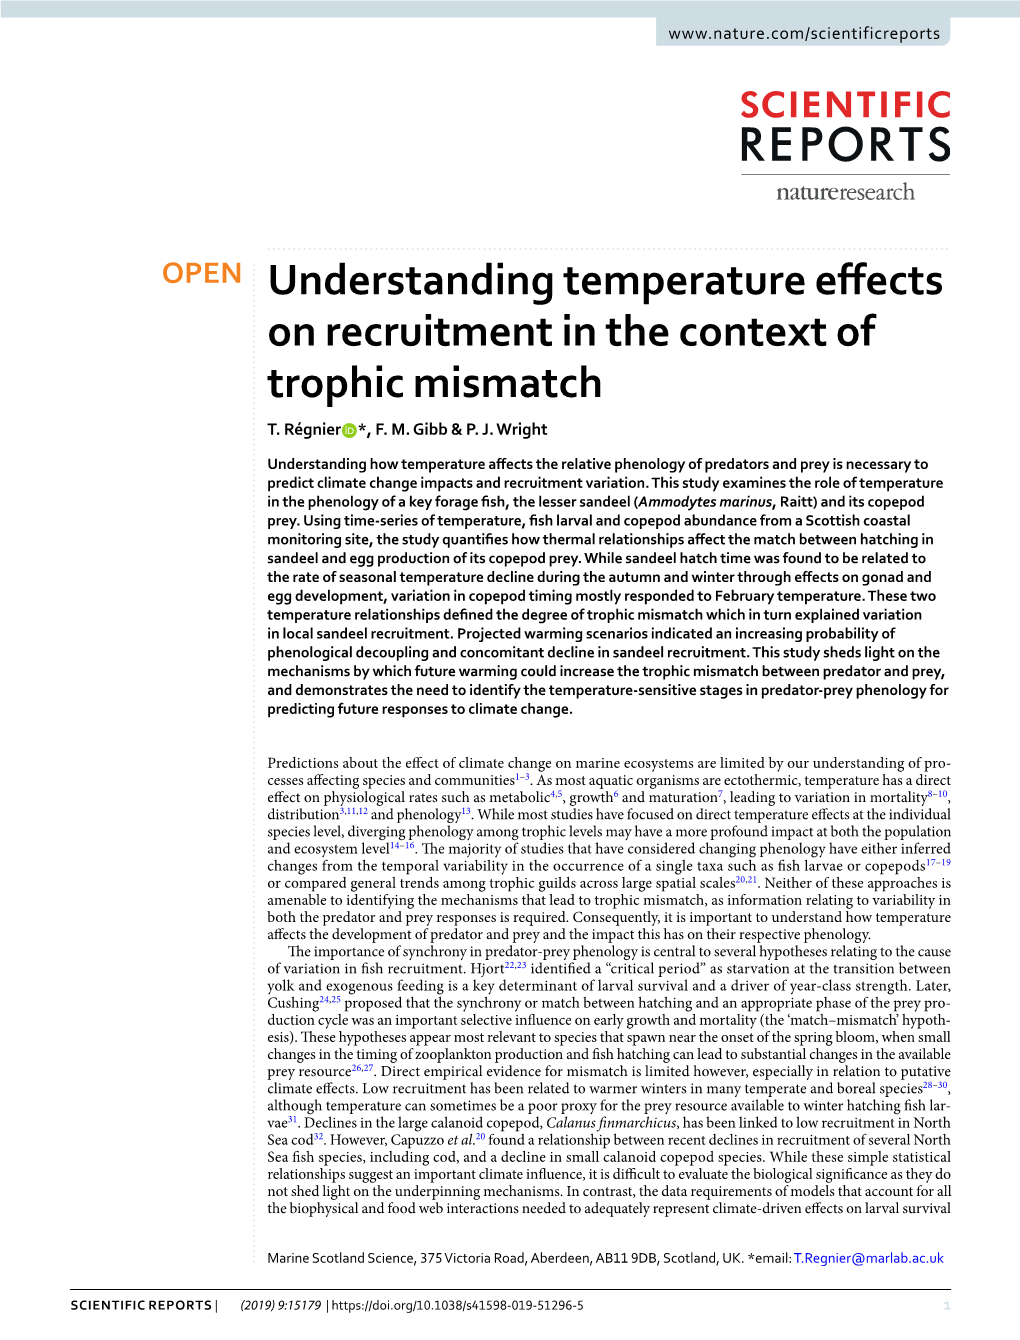 Understanding Temperature Effects on Recruitment in the Context of Trophic Mismatch